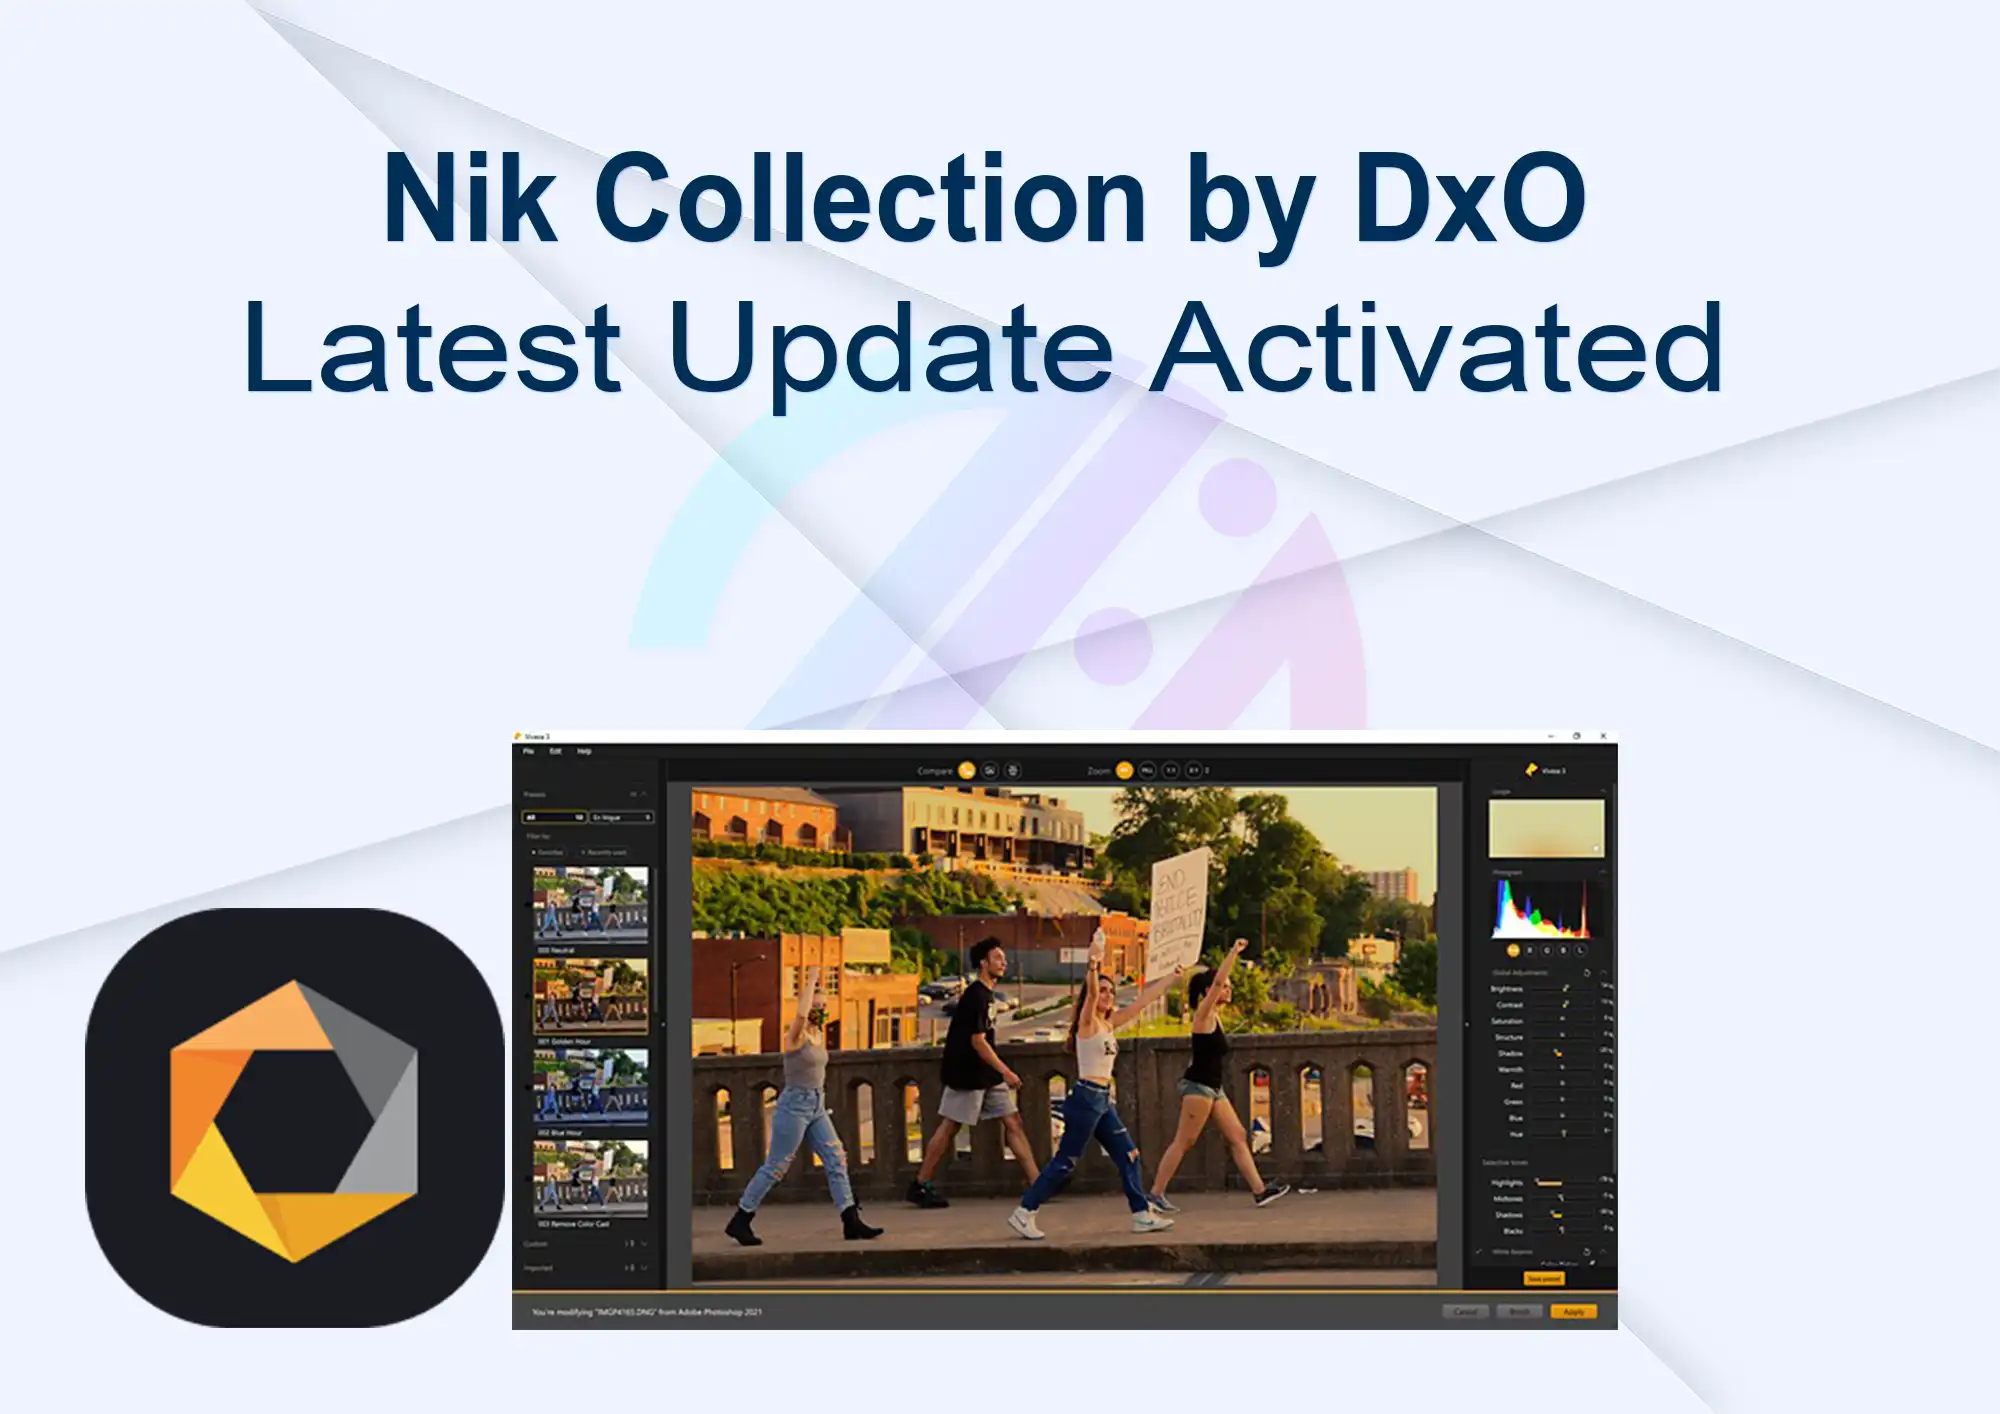 Nik Collection by DxO Latest Update Activated